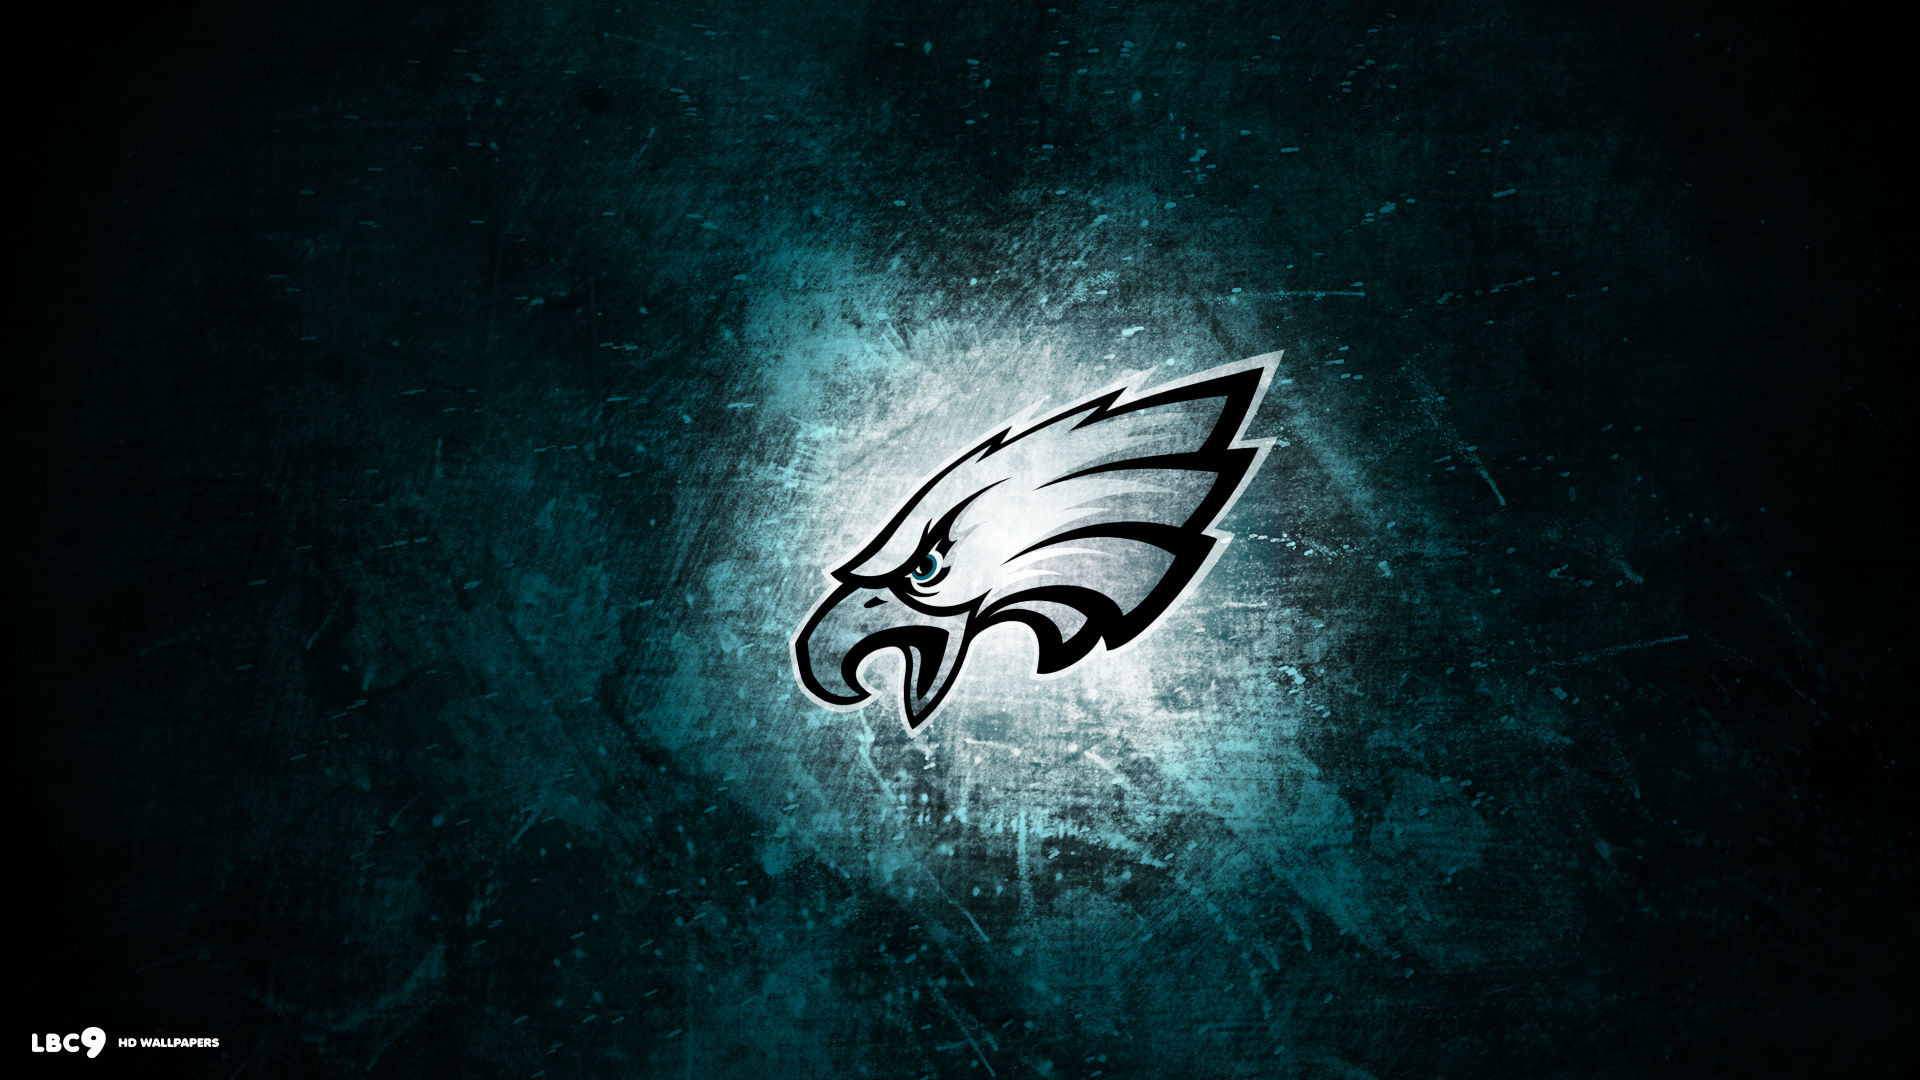 1920x1080 + images about Philly boy on Pinterest Stop signs, Bunker 1440Ã900 Free  Philadelphia Eagles Wallpapers | Adorable Wallpapers | Desktop | Pinterest  ...